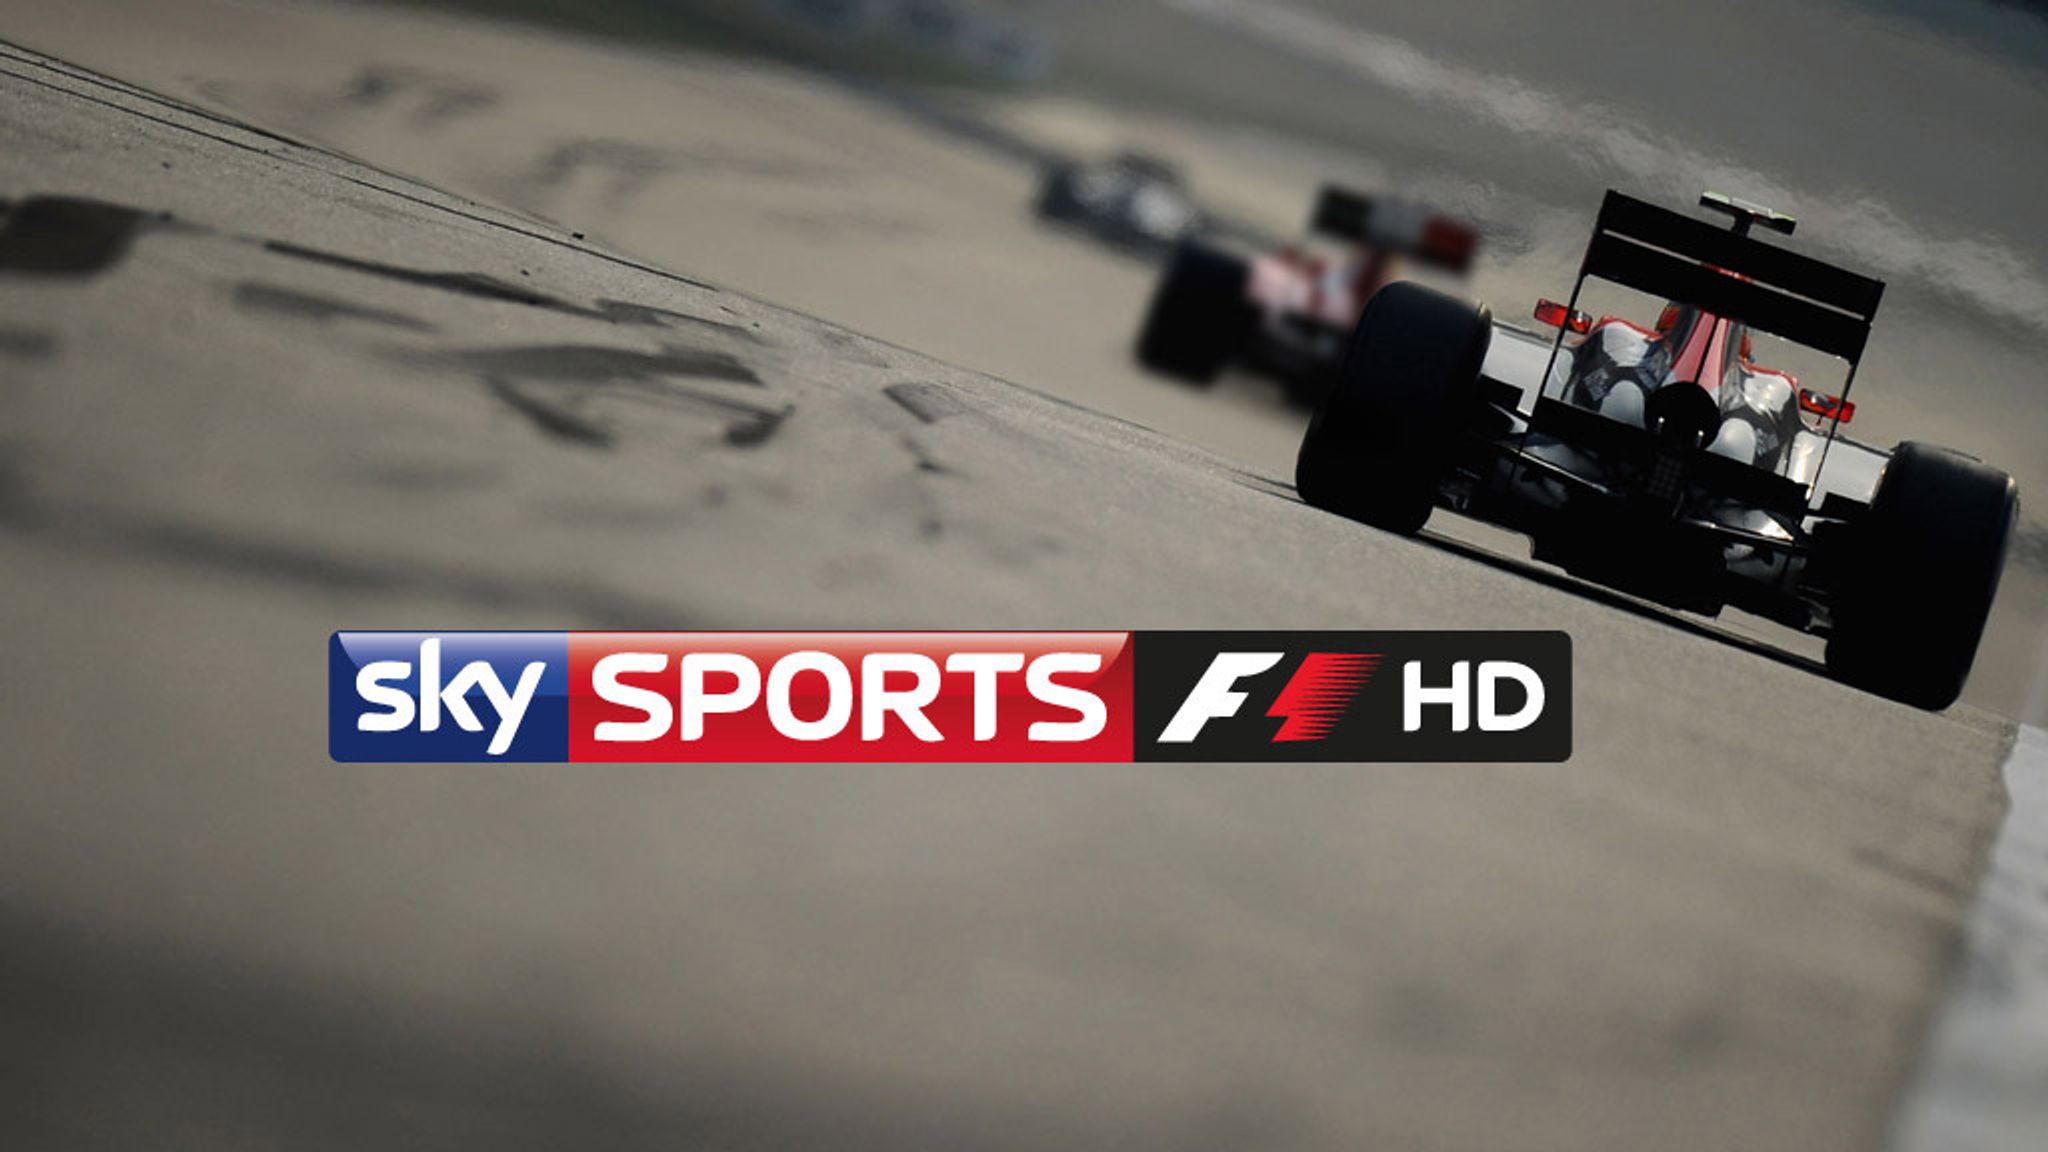 f1 sports channel